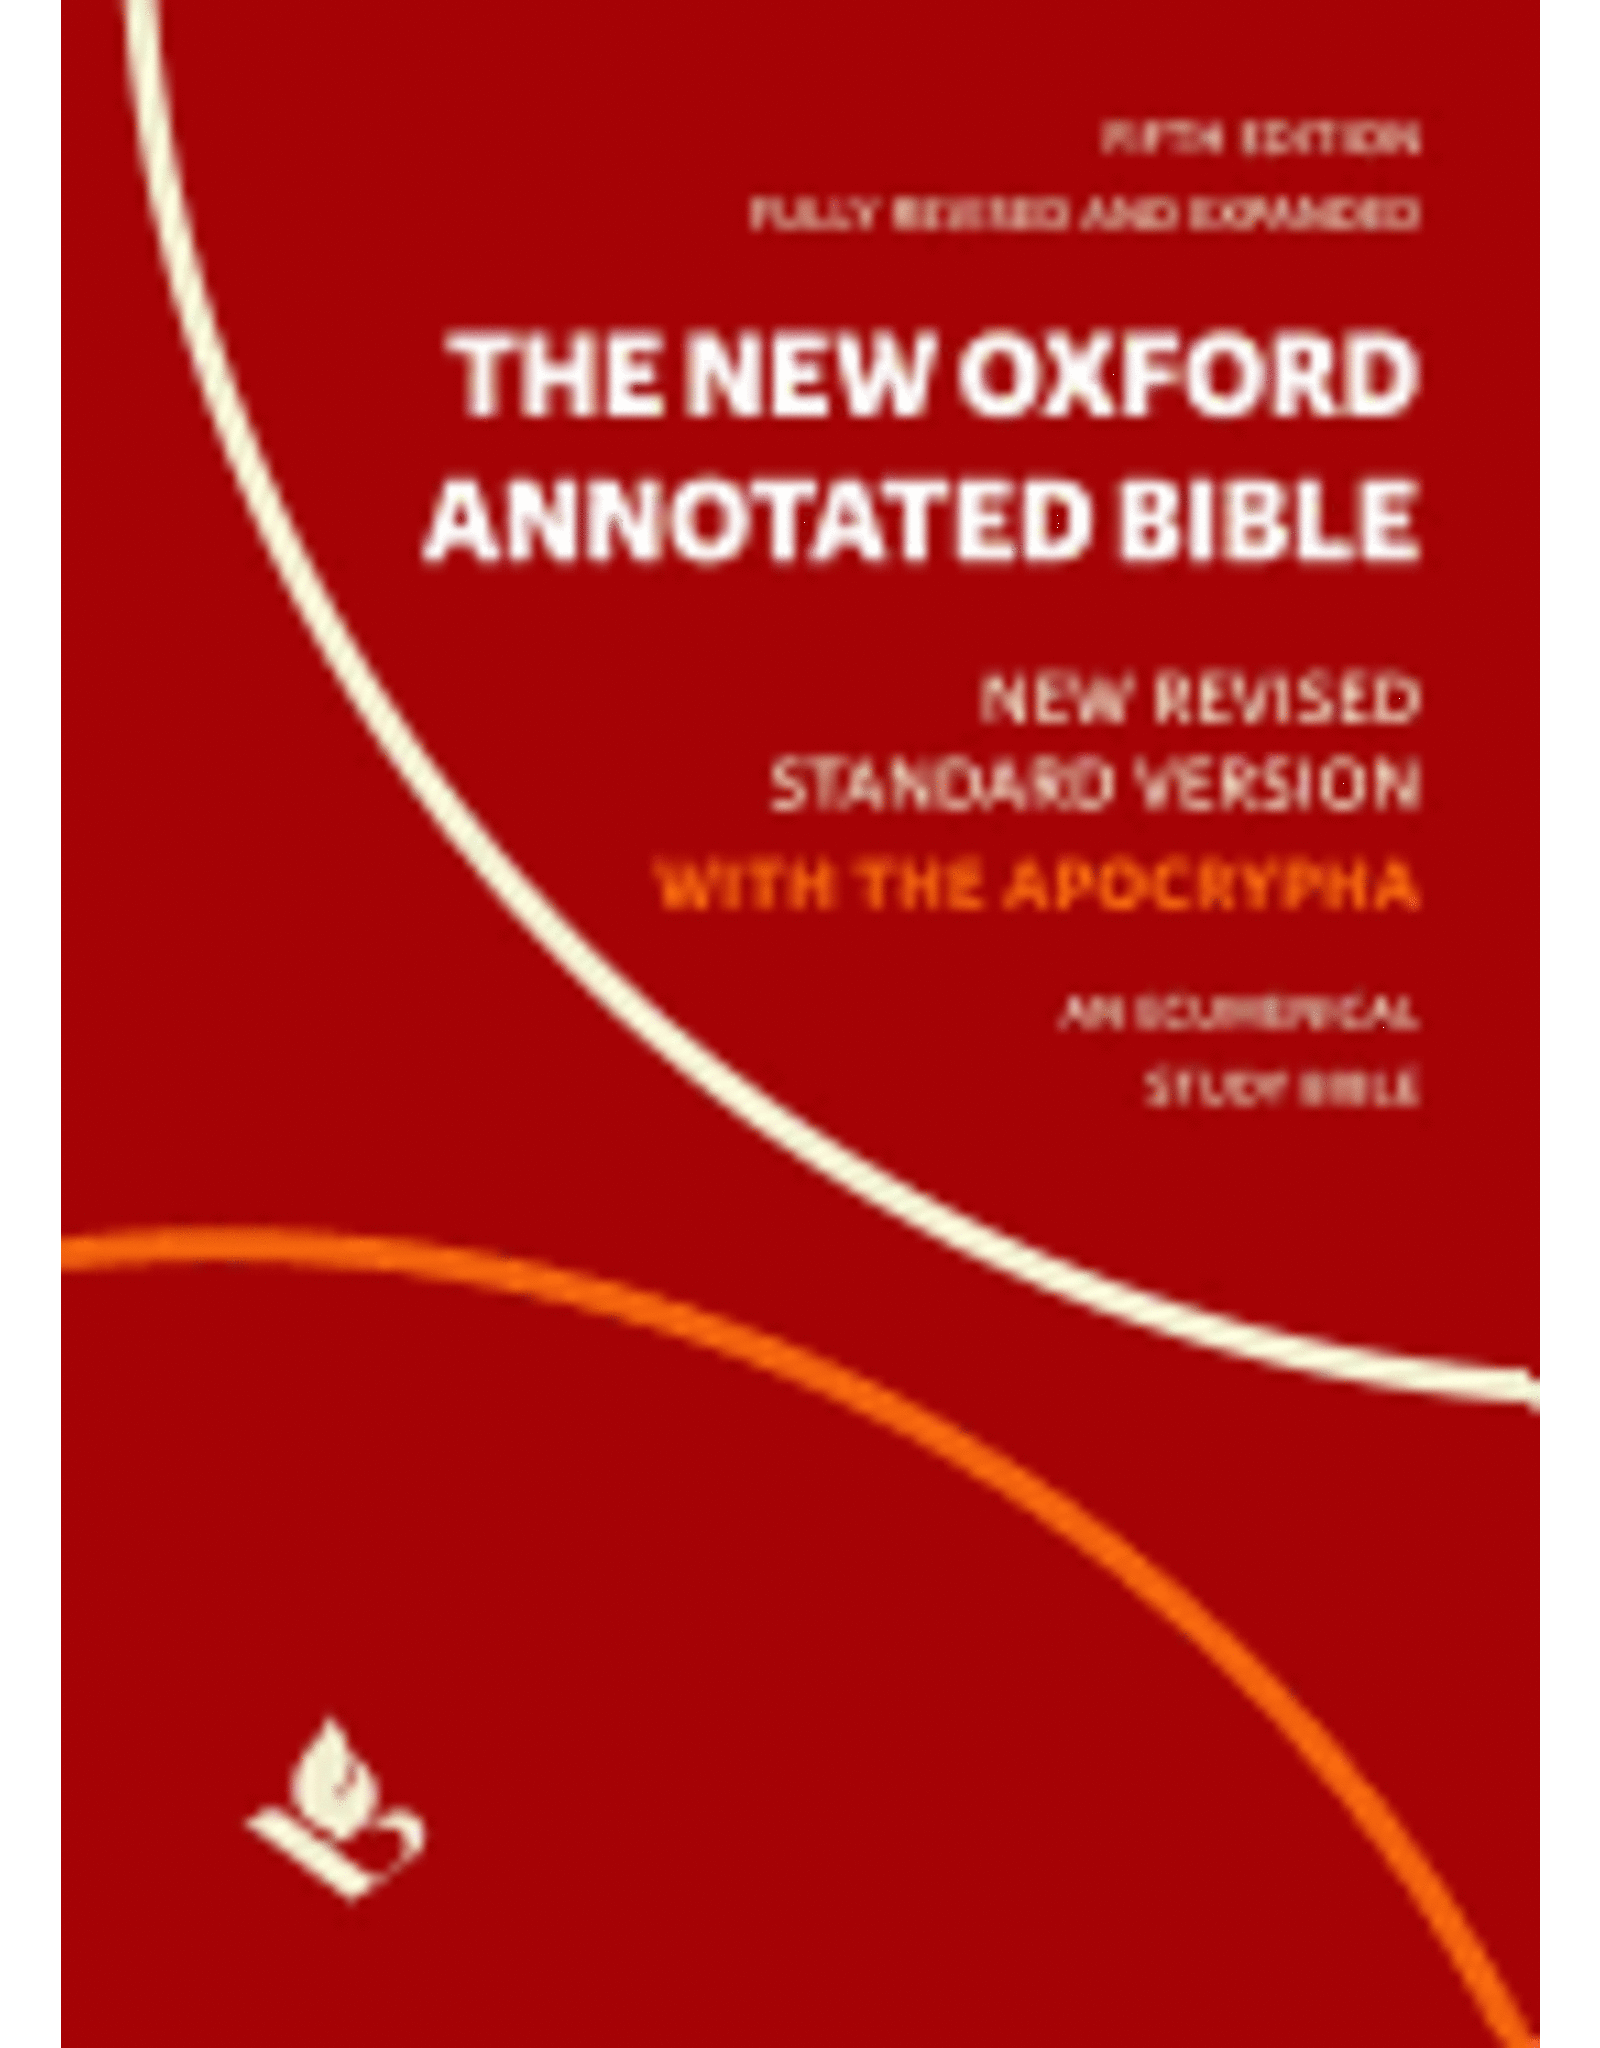 Oxford University Press NRSV New Oxford Annotated Bible